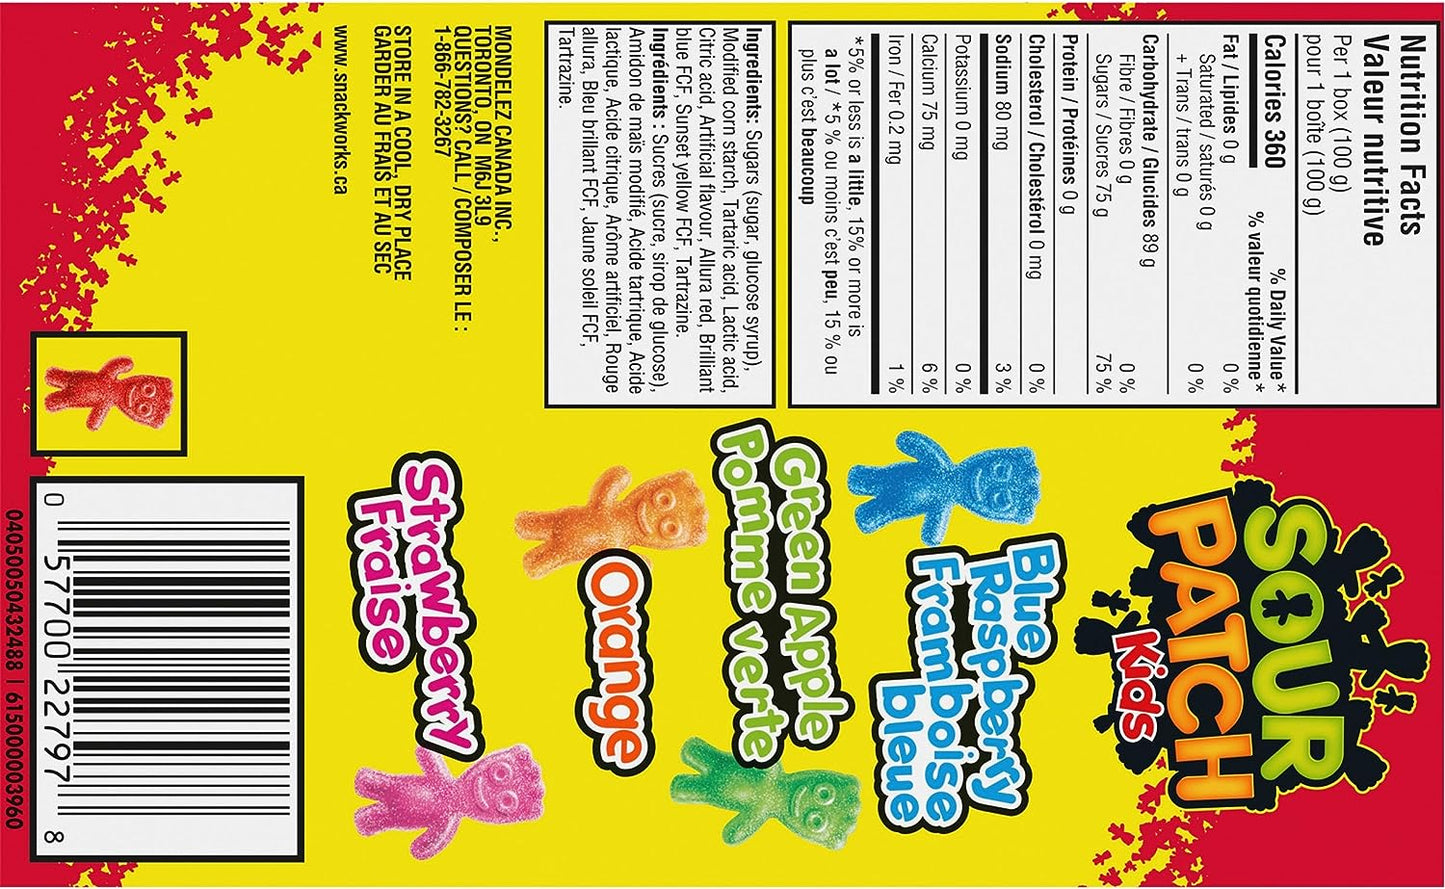 Sour Patch Kids Extreme Sour Candy - Candy Box, 100 g